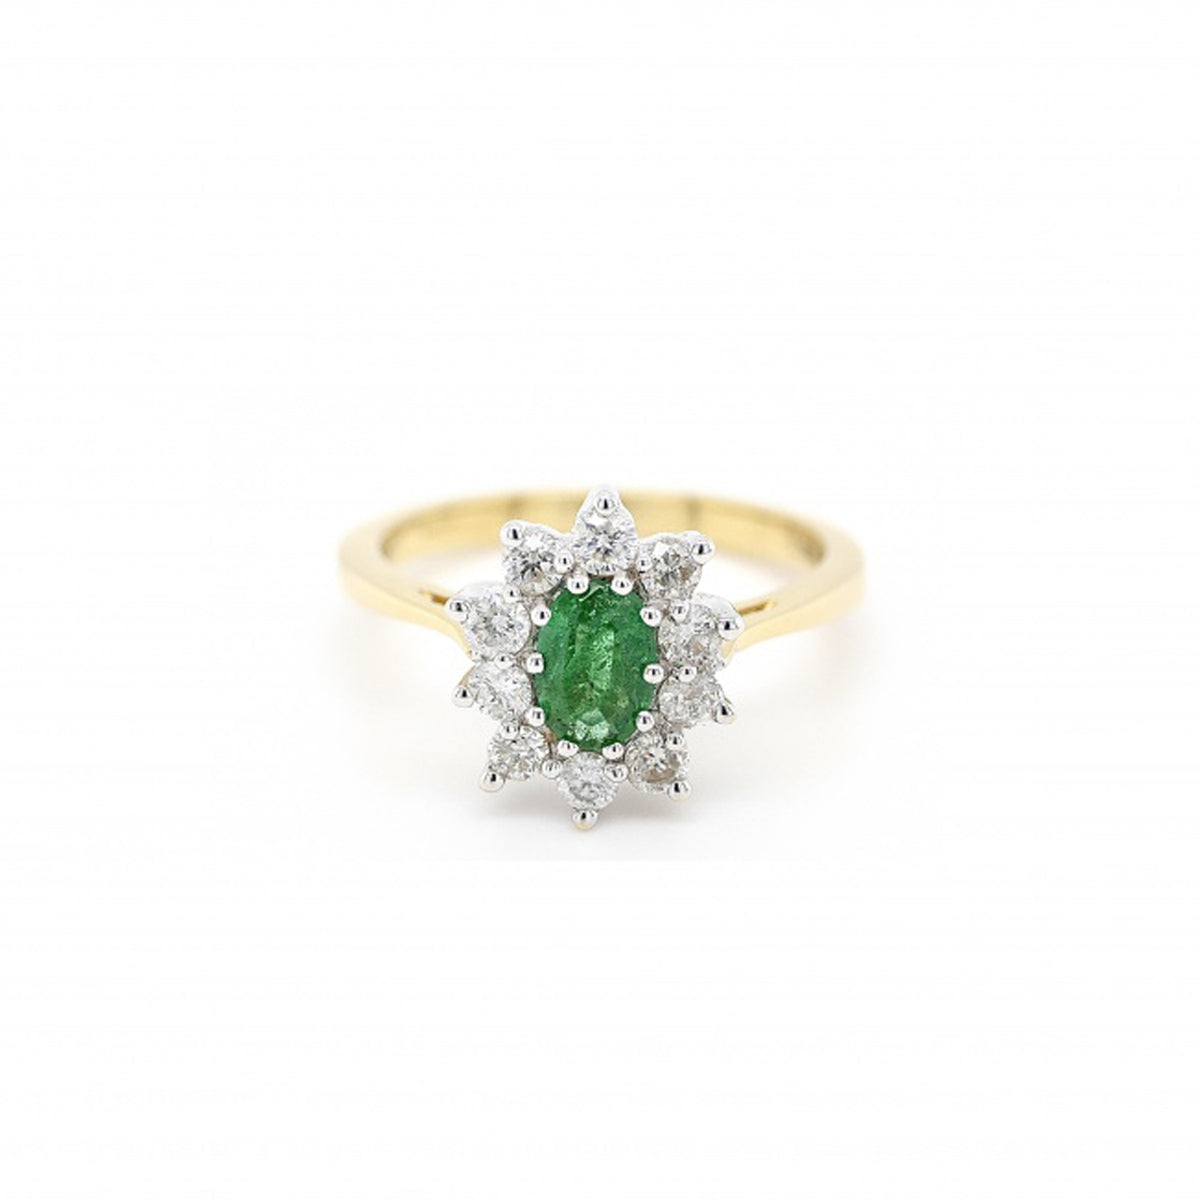 18ct Yellow & White Gold Emerald & Diamond Cluster Ring - Size N.5